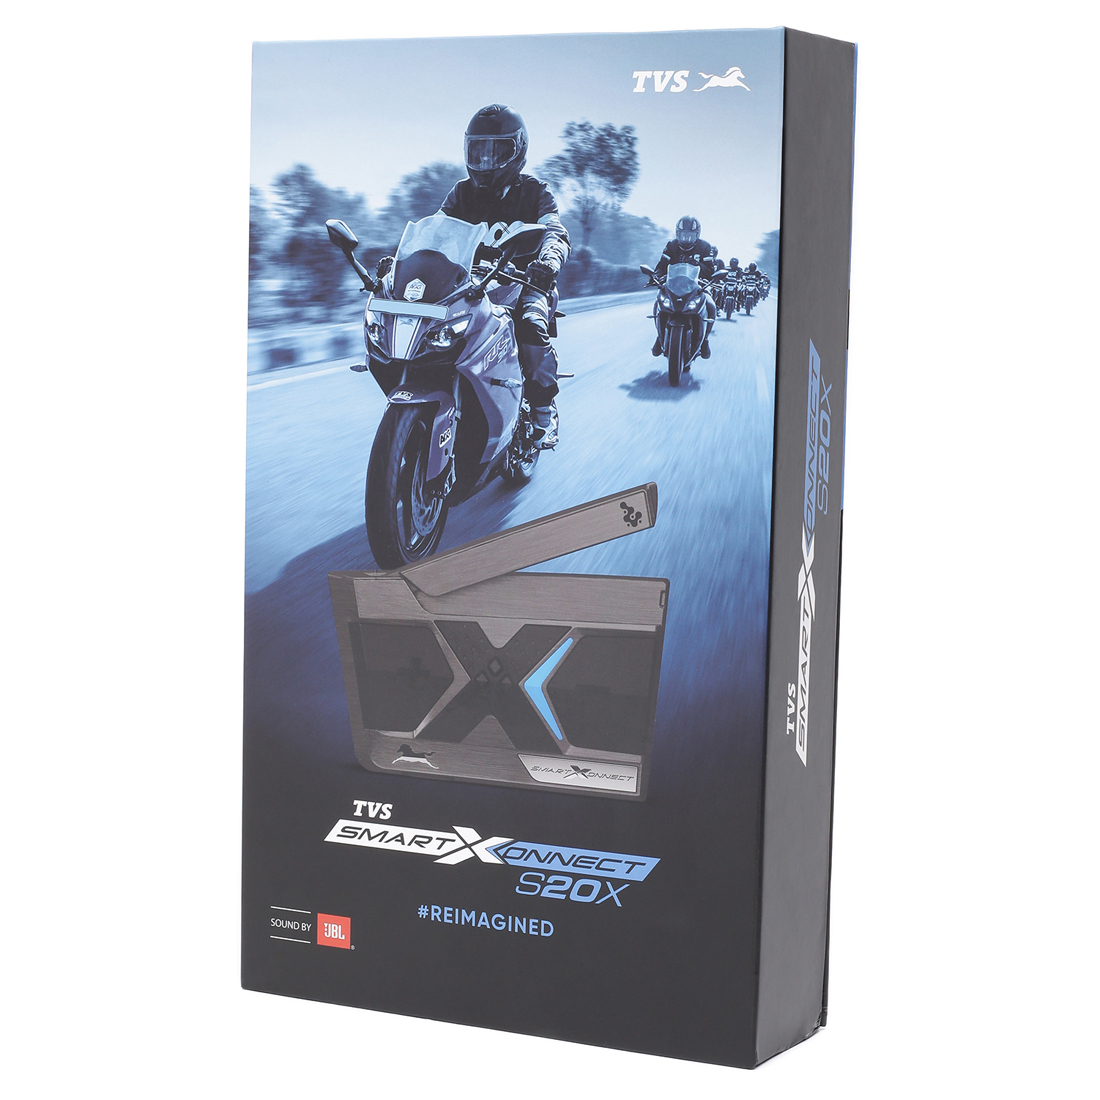  TVS Racing SmartXonnect S20X : Premium Helmet Bluetooth Device With Intercom Connecting 20 Devices, JBL HD Sound, & 1.2 Km Range- Waterproof With 16 Hours Battery